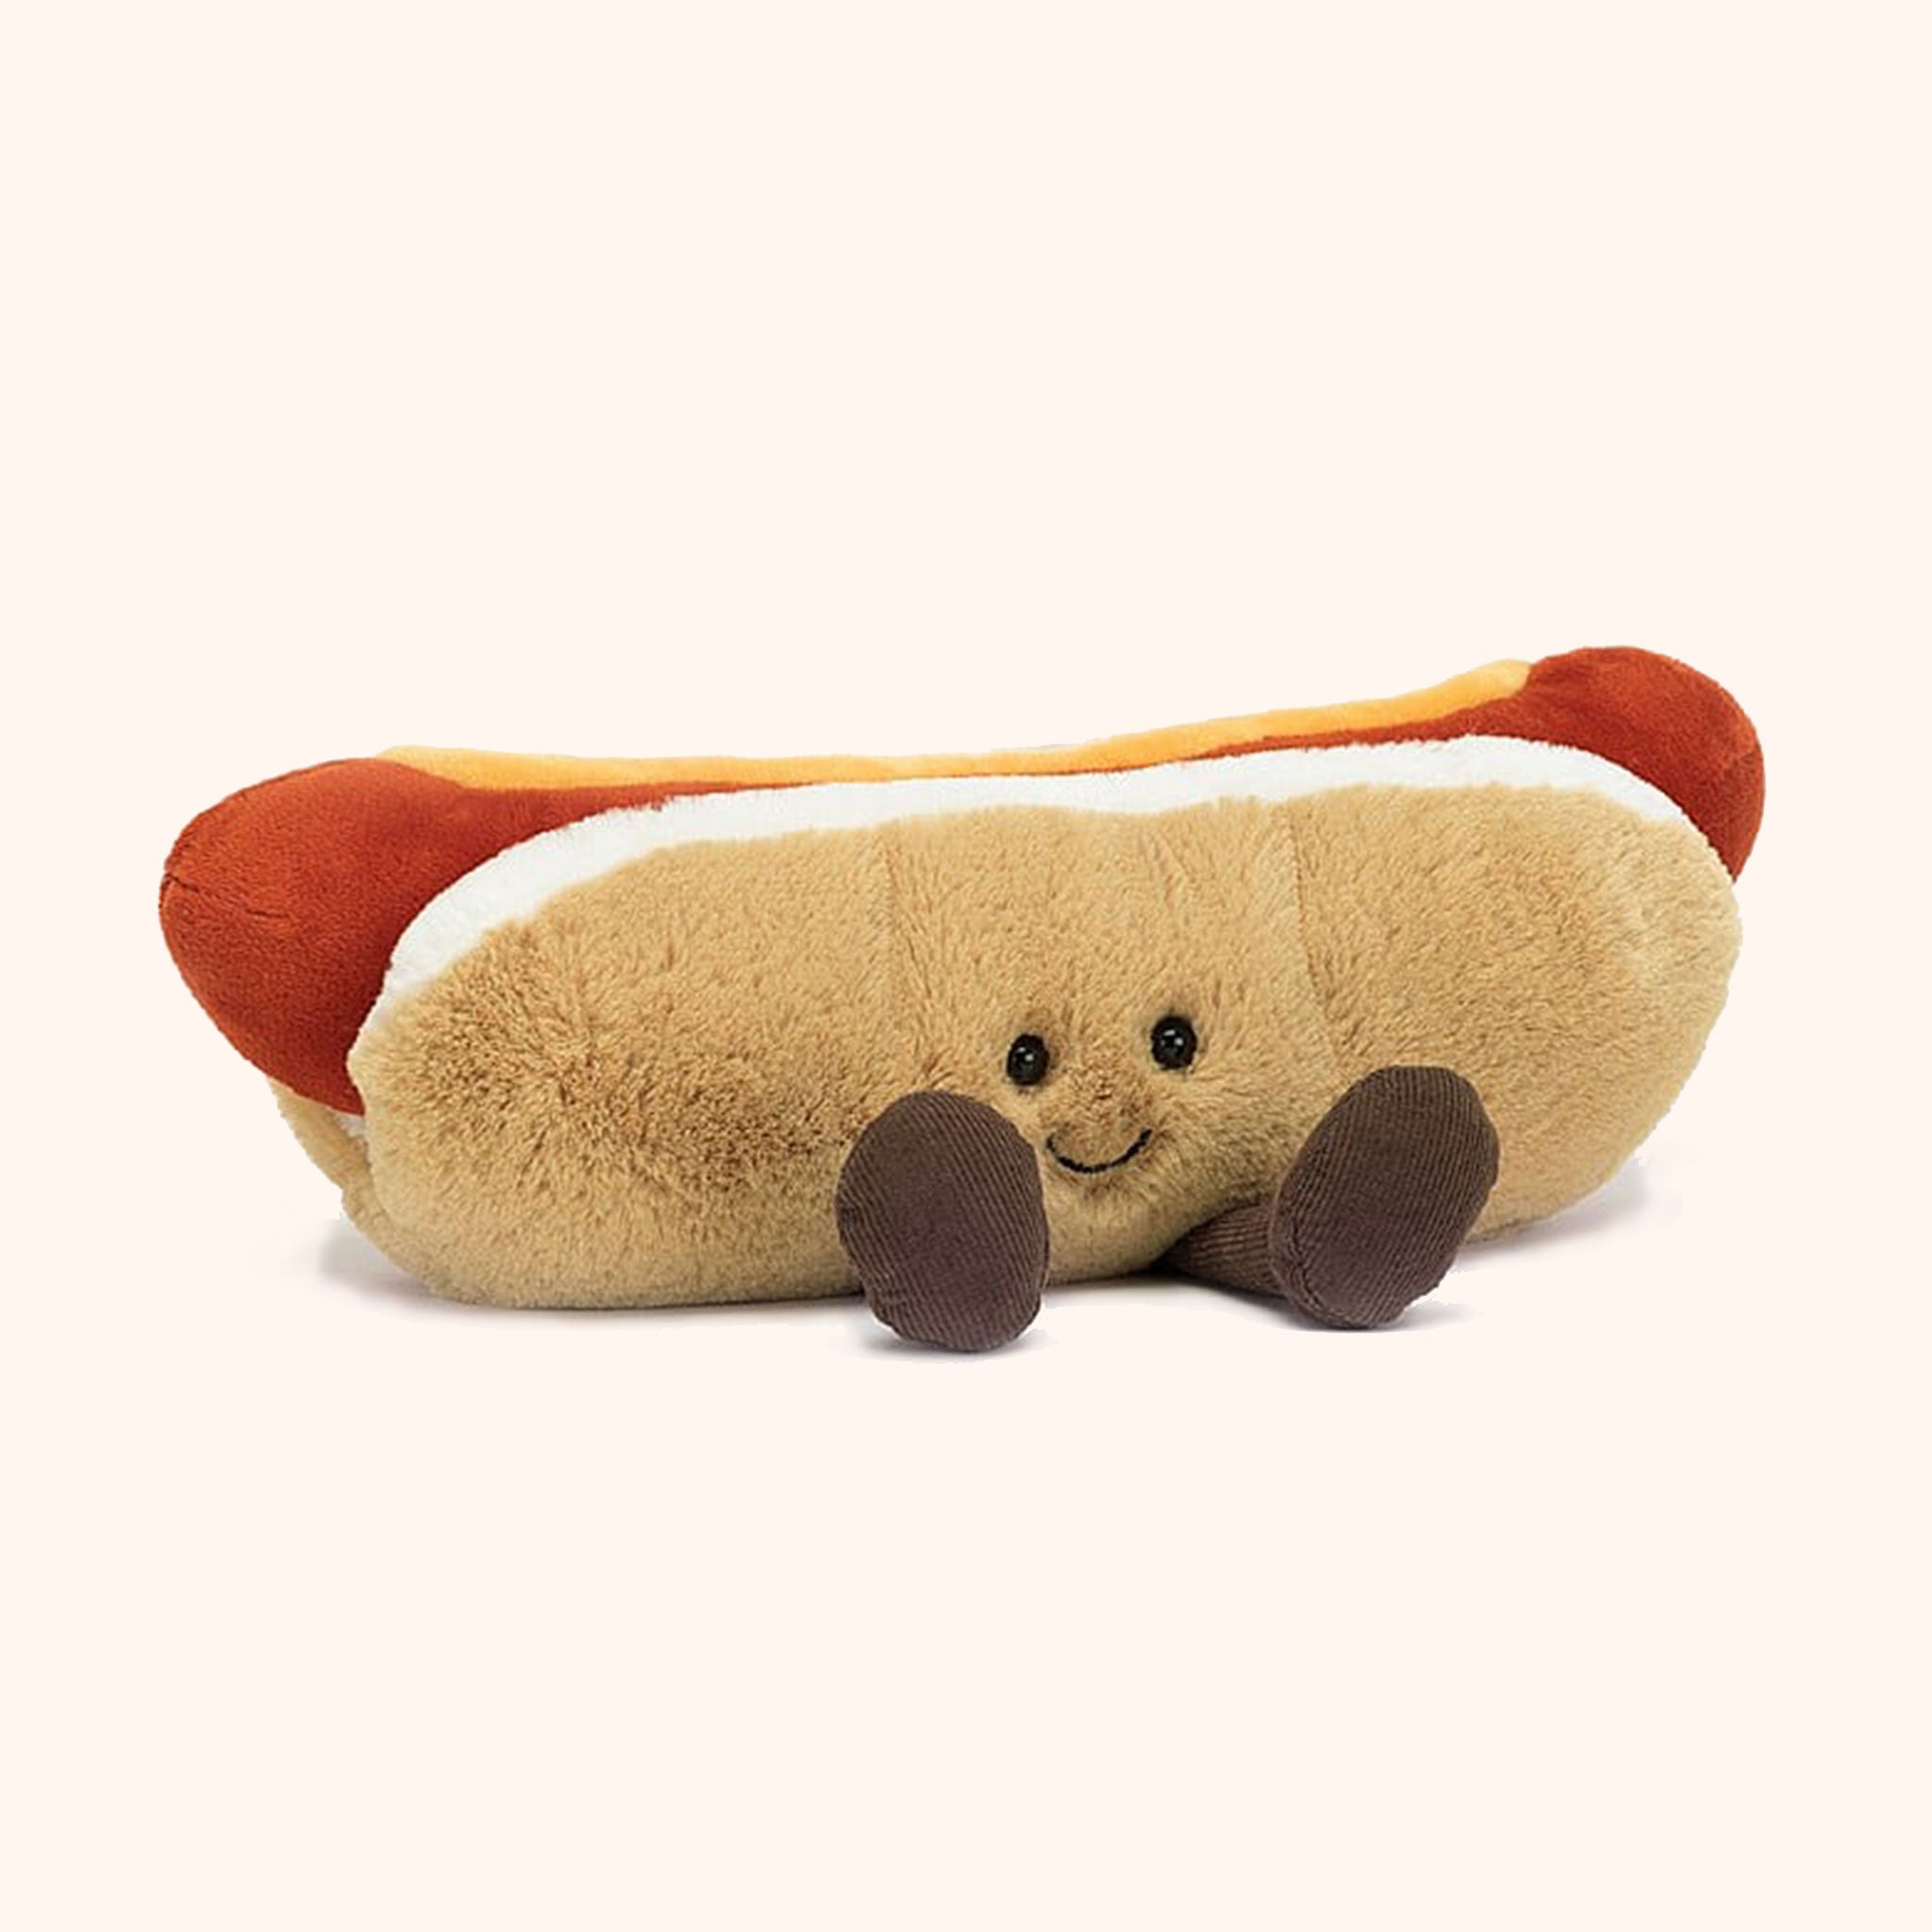 On a neutral background is an amusable hot dog stuffed animal. 